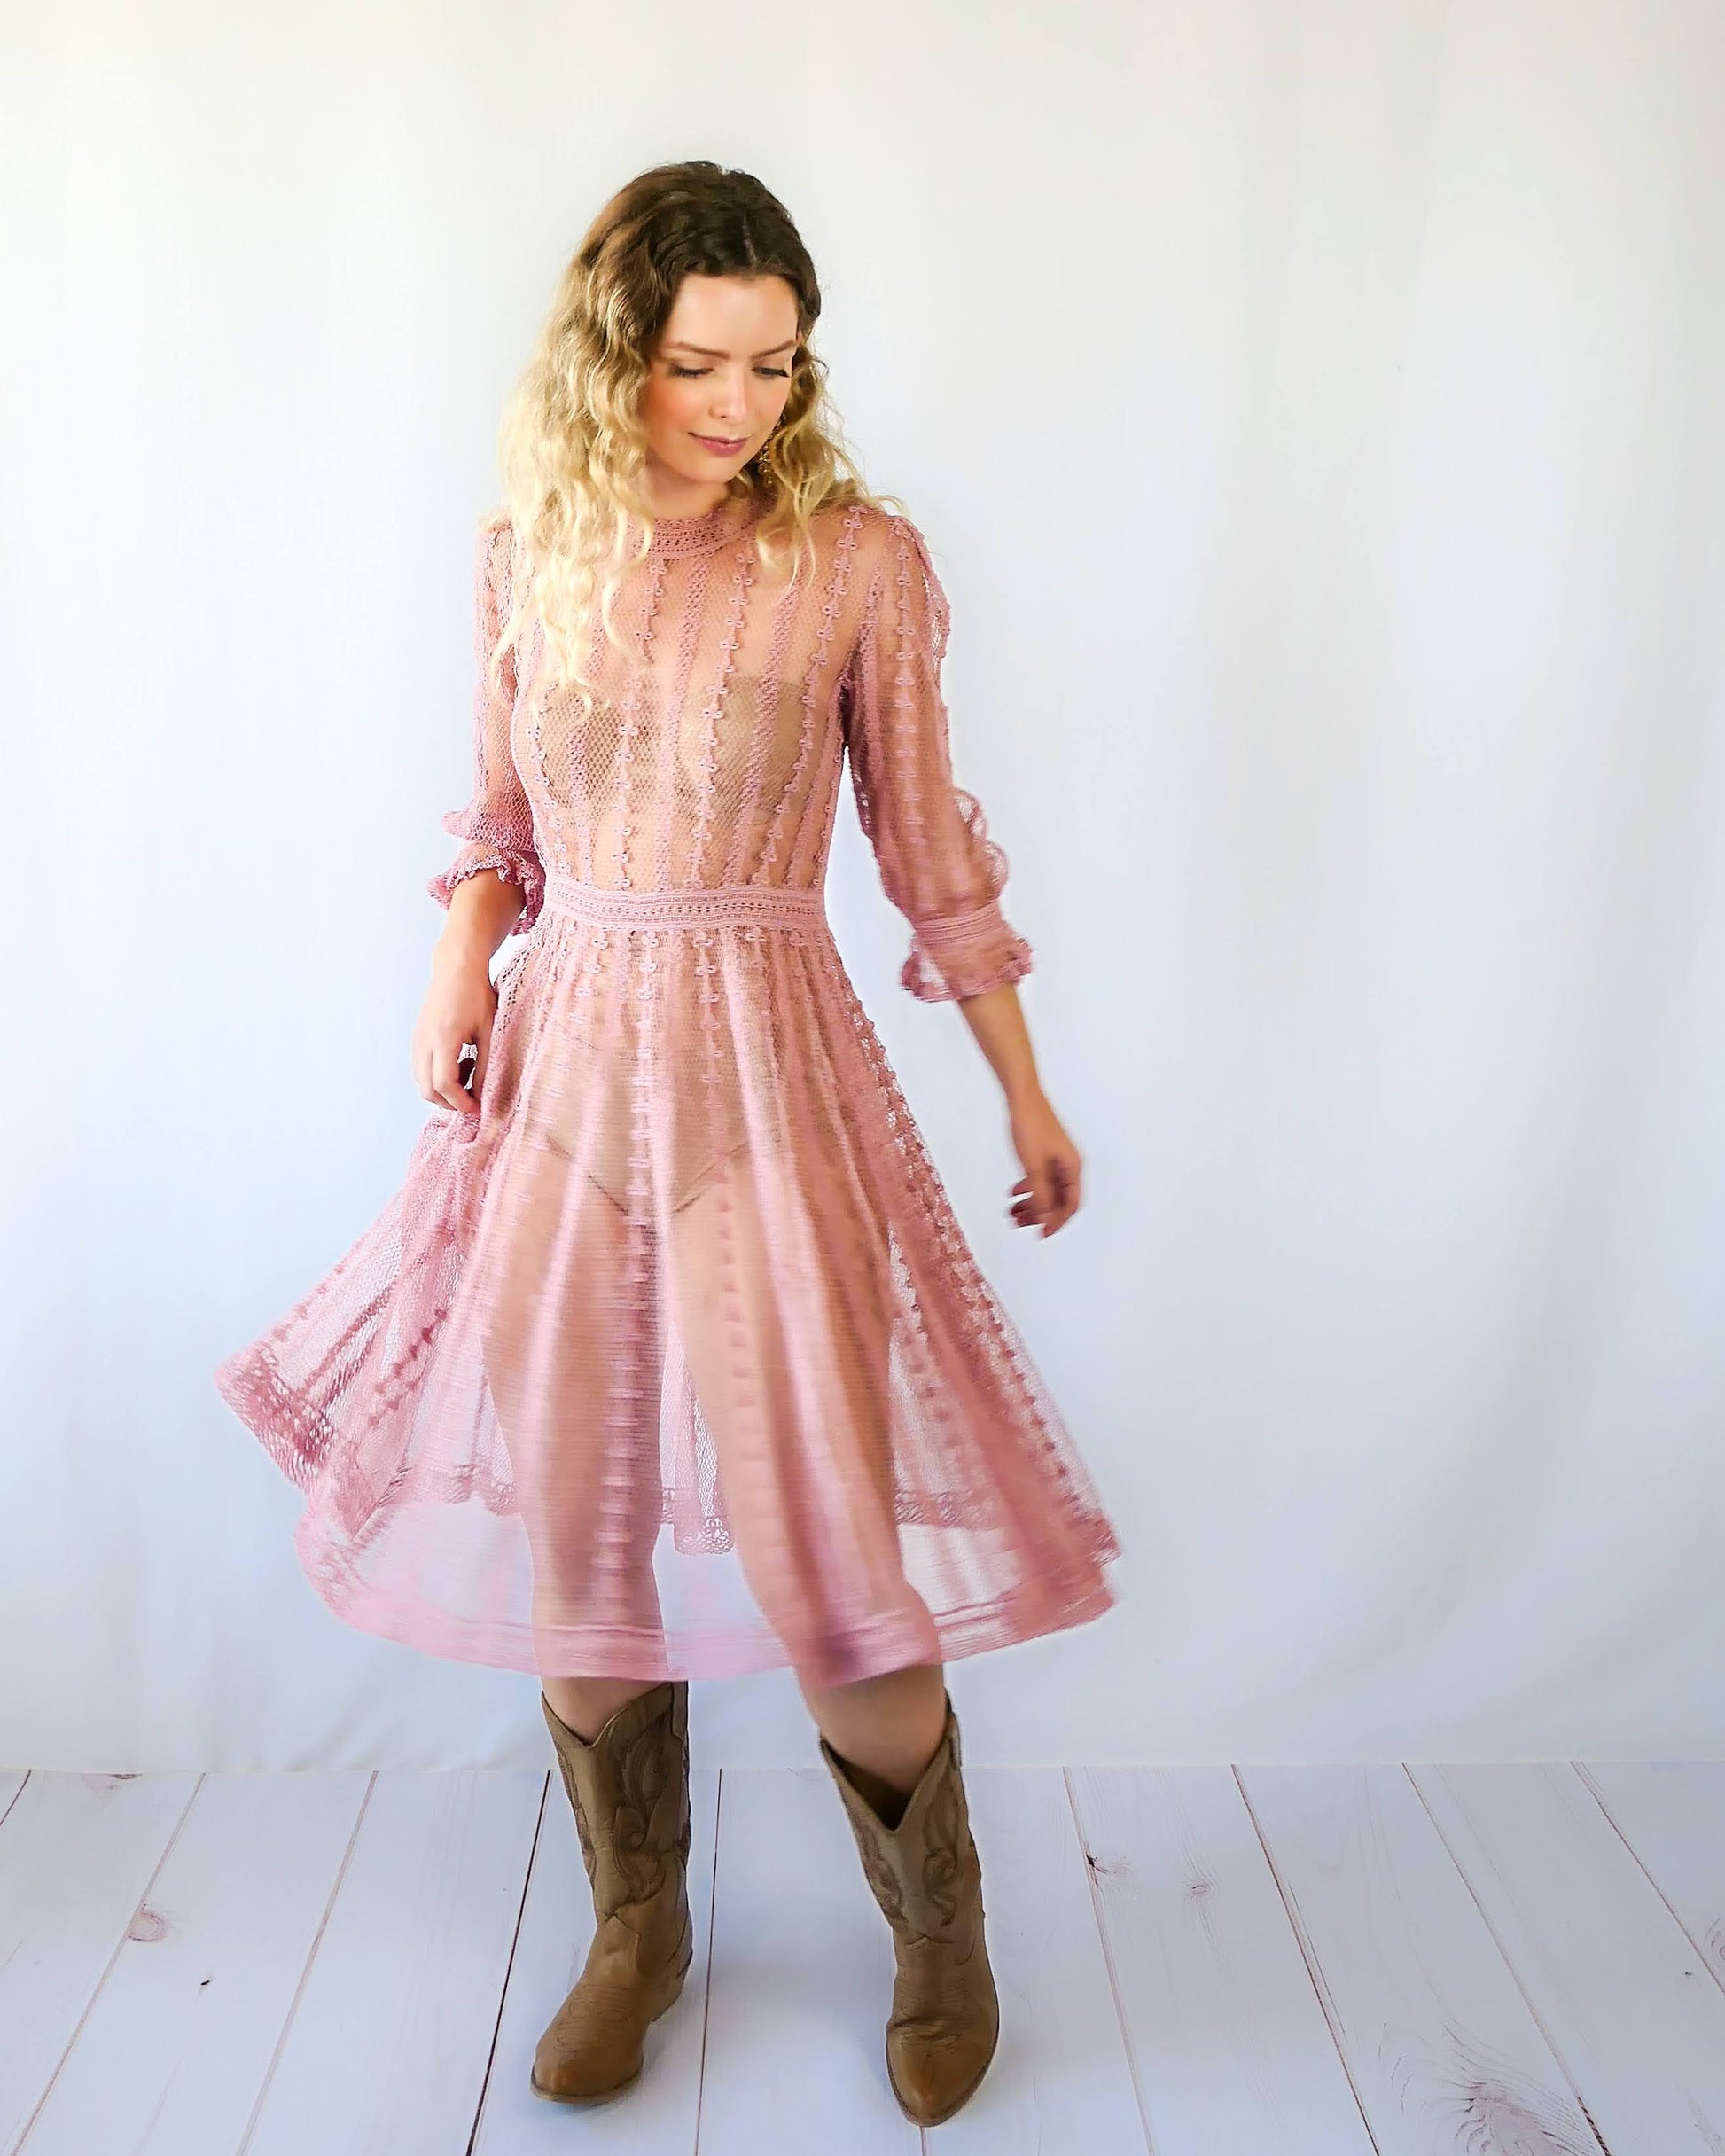 Picture of Lim's Vintage midi length crochet dress in muted rose color. The model is twirling around. Fitted waist, flares out towards the hem. Ruffle at the bottom of the sleeves. Made with fine cotton yarns to create a sheer look.